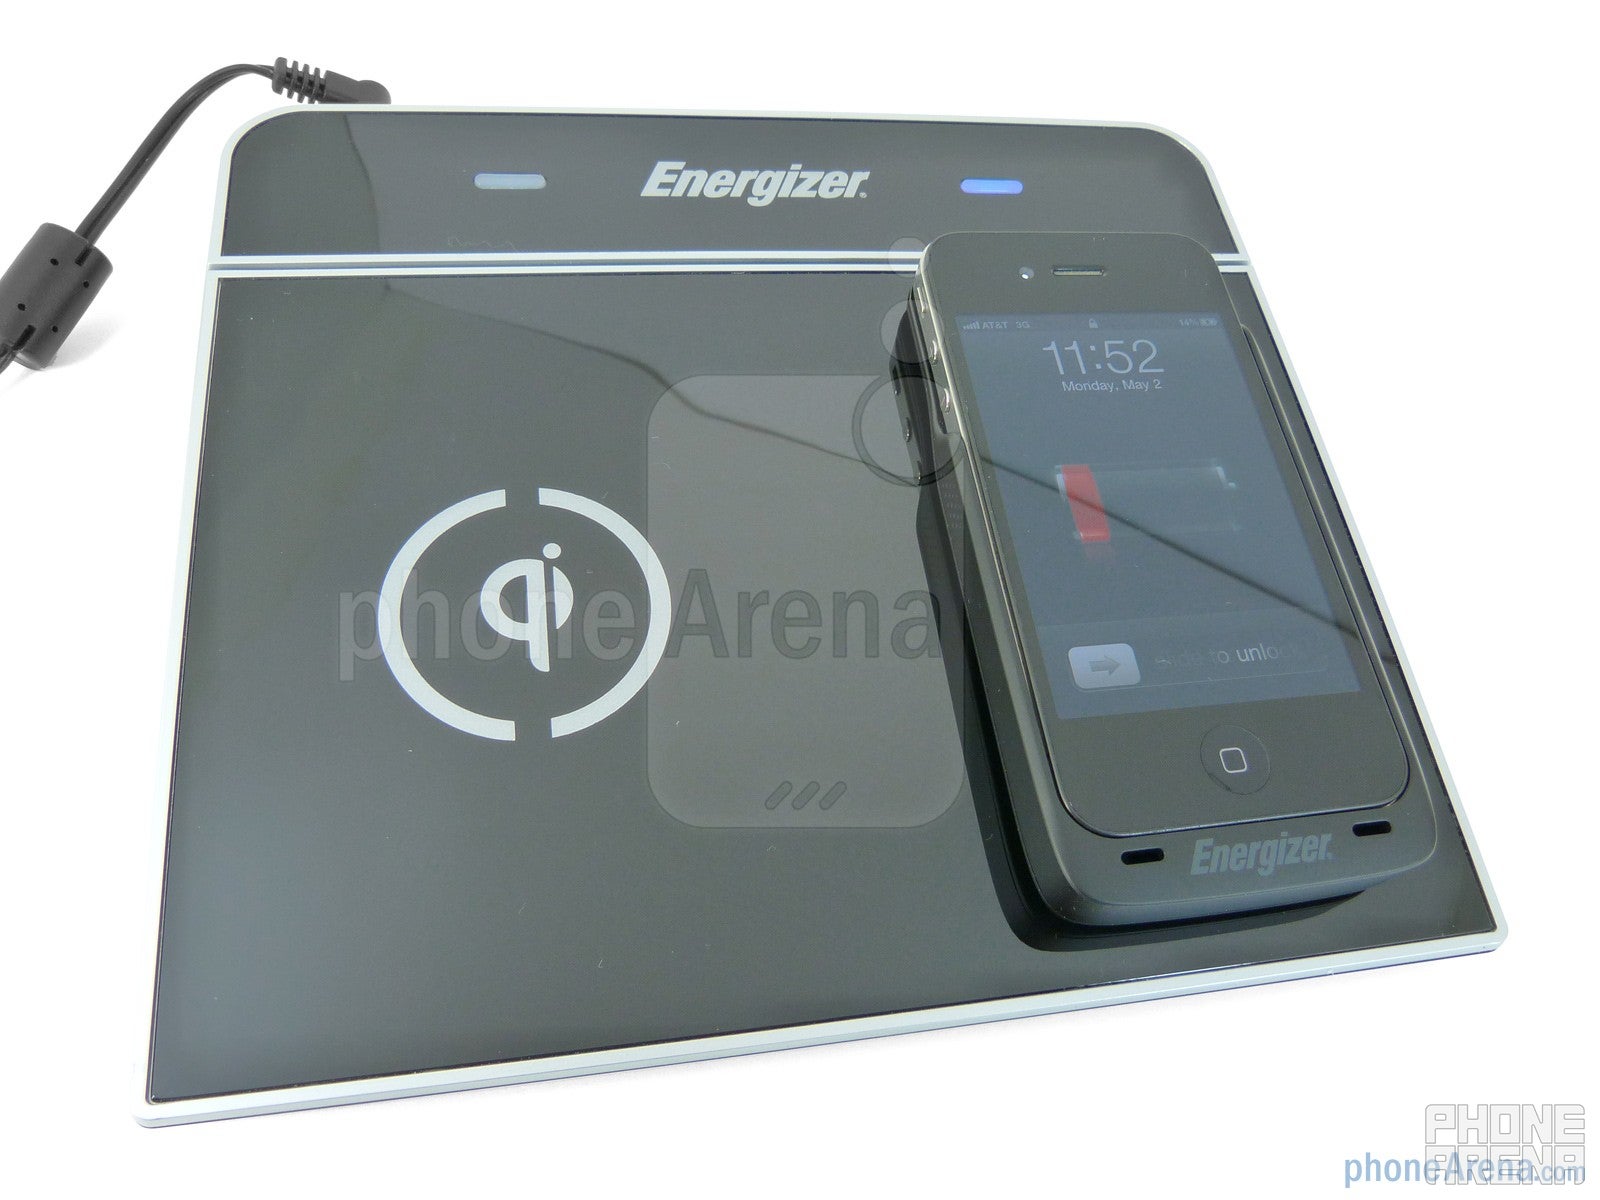 Energizer Inductive Charger Review